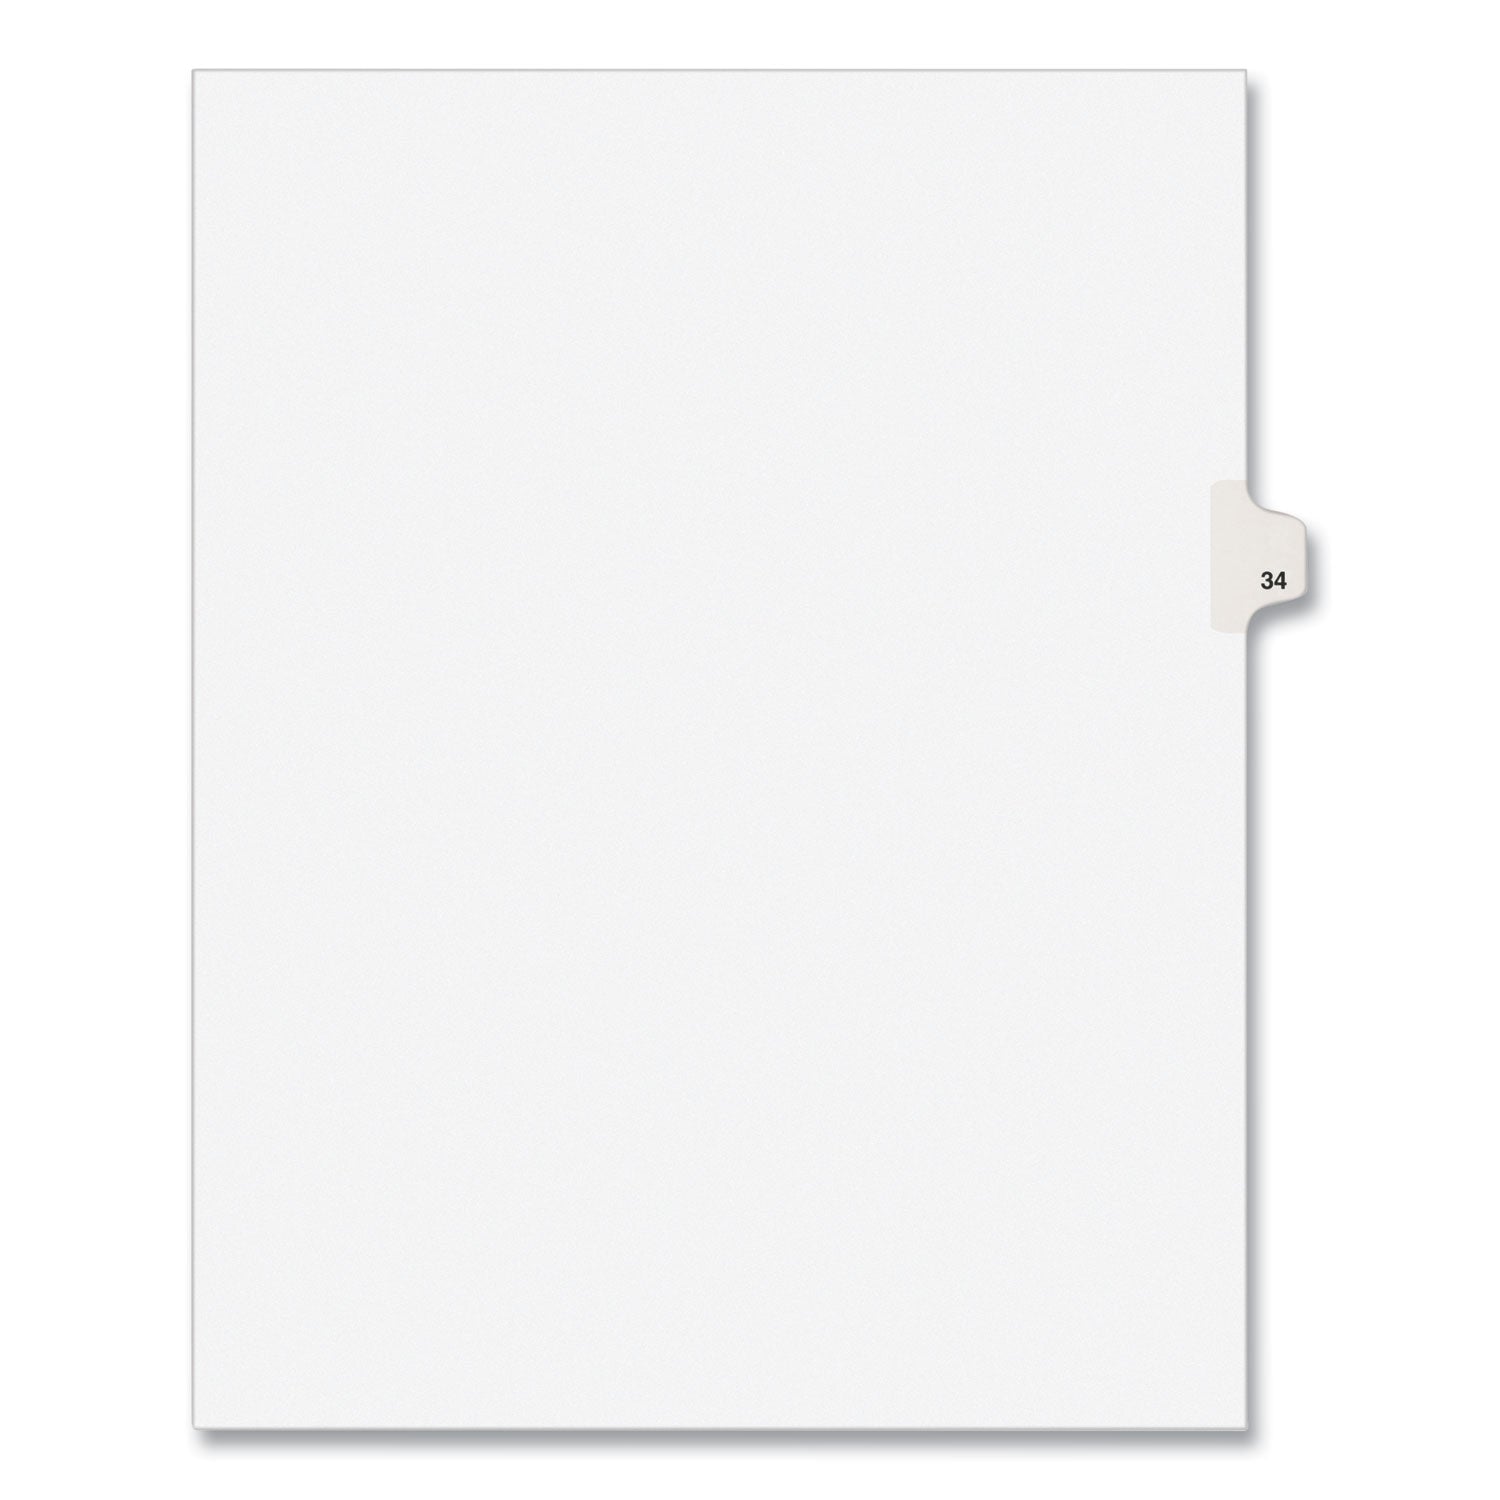 Preprinted Legal Exhibit Side Tab Index Dividers, Avery Style, 10-Tab, 34, 11 x 8.5, White, 25/Pack, (1034) - 